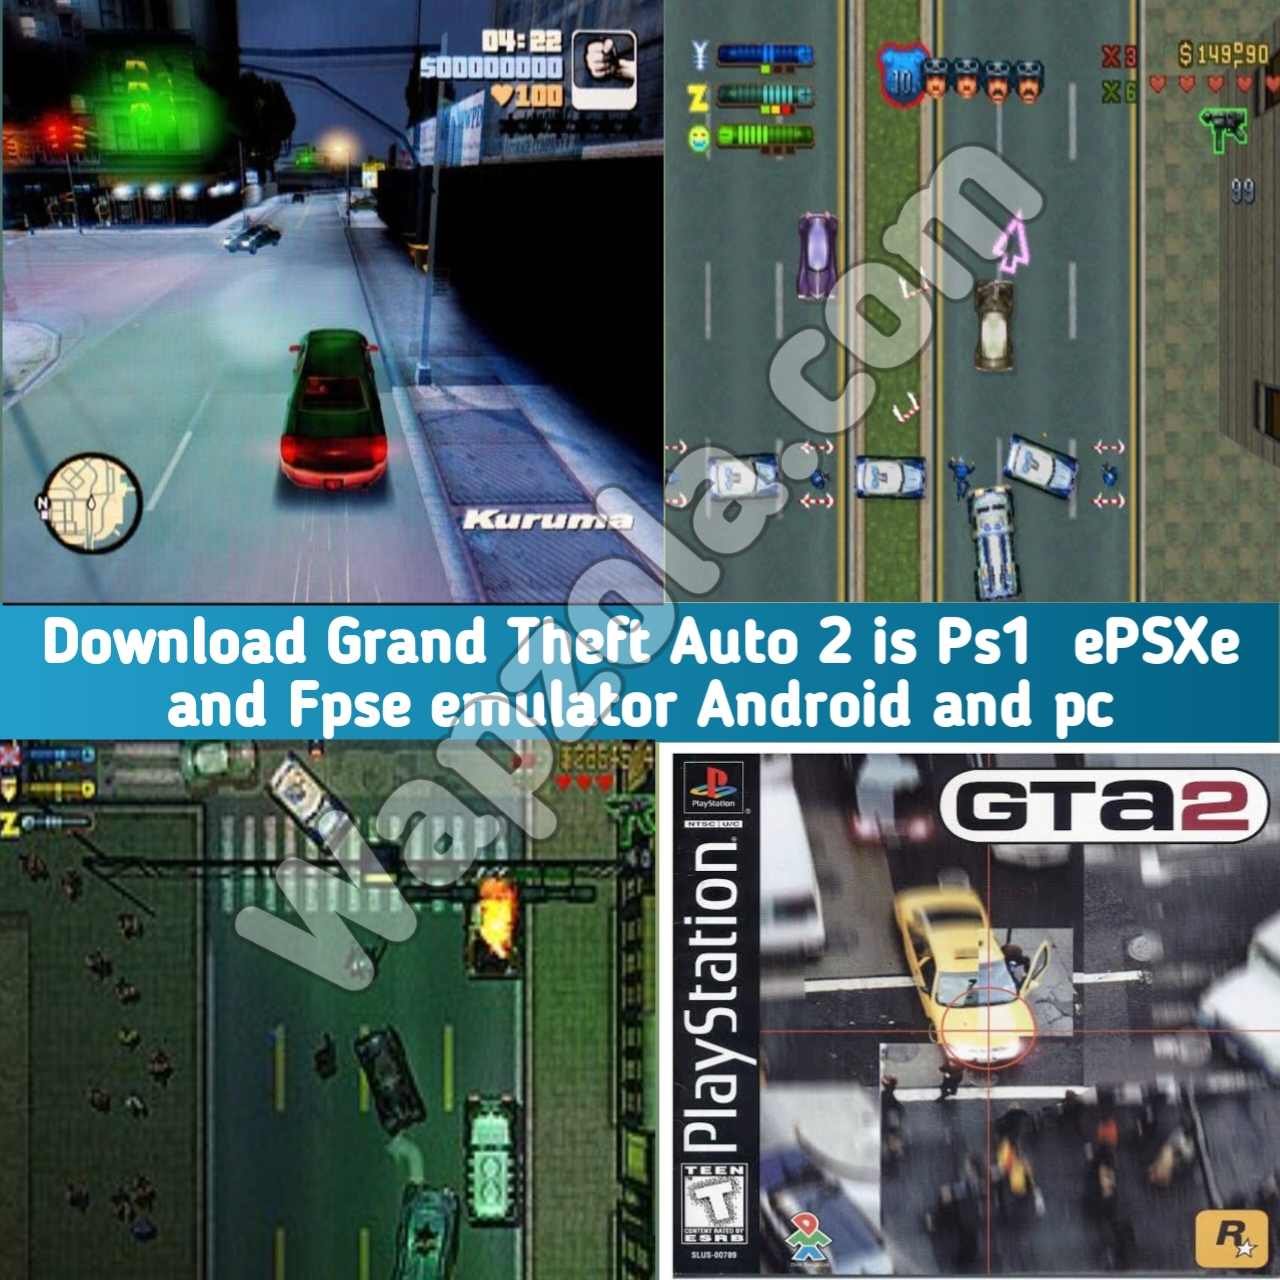 You are currently viewing [Download] Grand Theft Auto 2 ROM (ISO) ePSXe and Fpse emulator (355MB size) highly compressed – Sony Playstation / PSX / PS1 APK BIN/CUE play on Android and pc